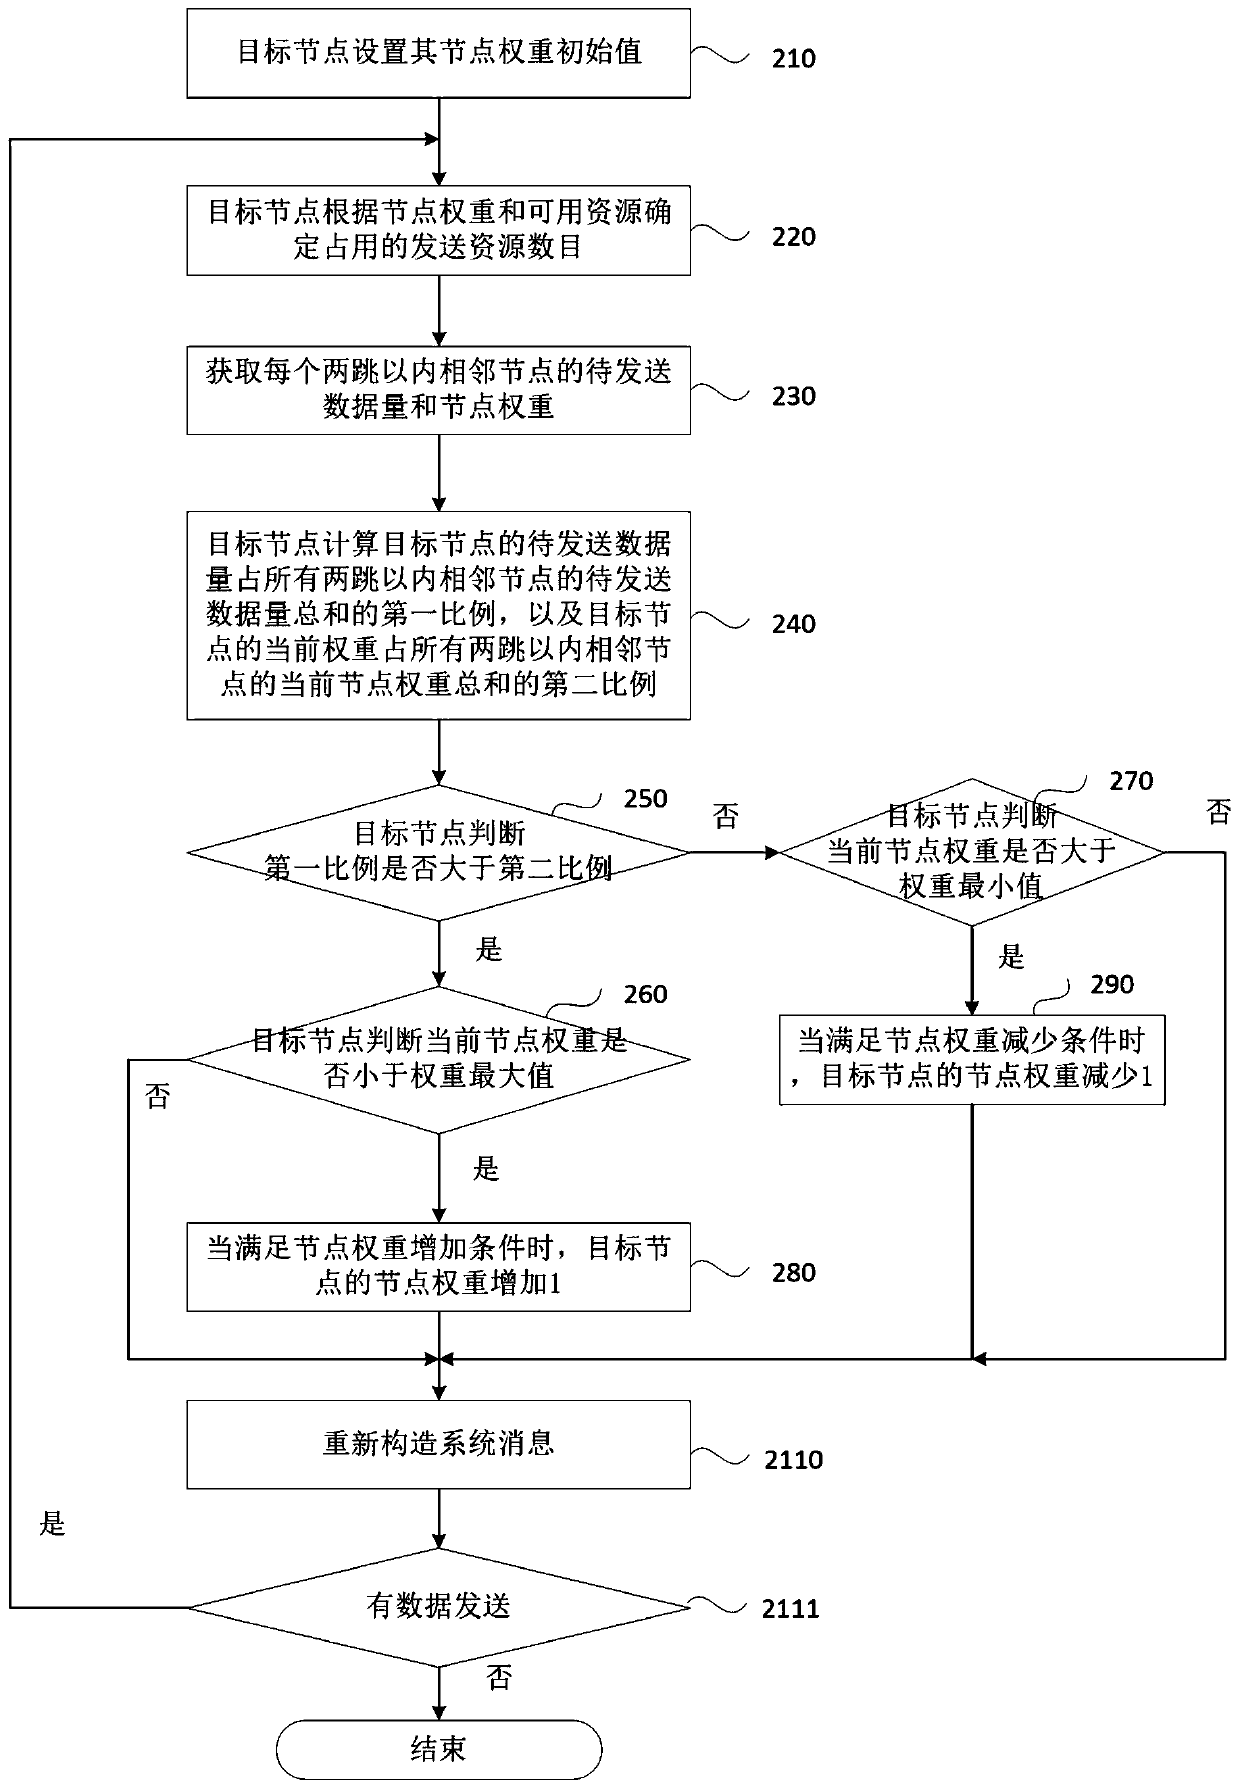 Wireless resource allocation method and device, equipment and storage medium